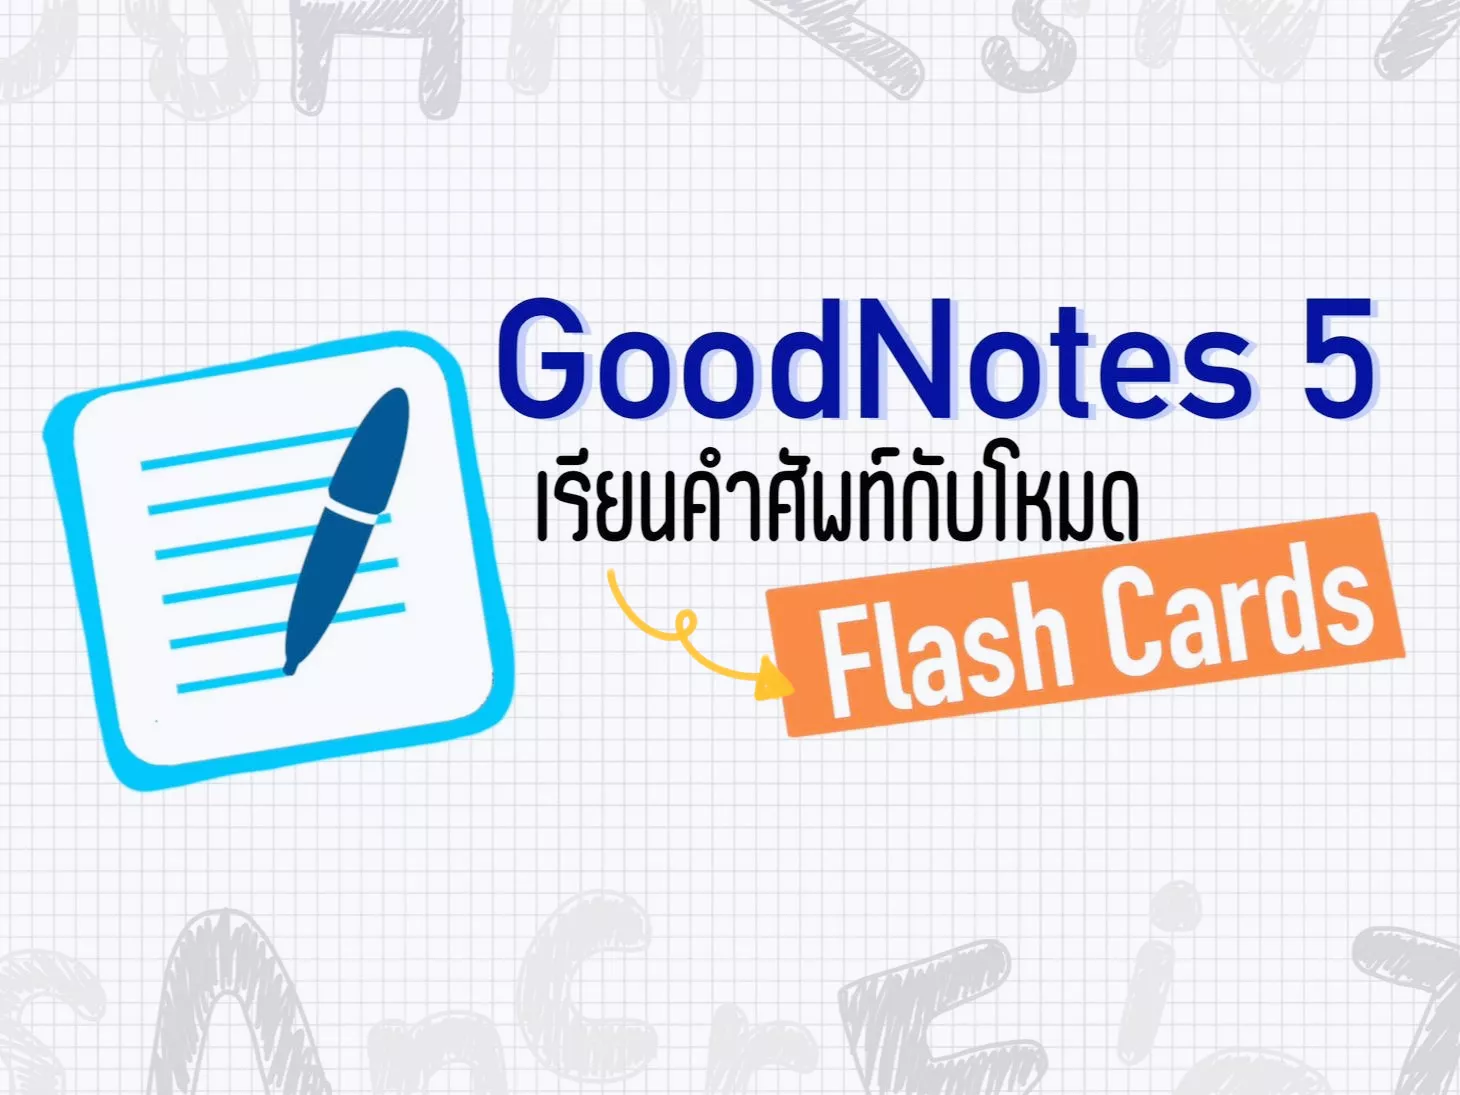 GoodNotes 5] Study with the Flashcards feature – Goodnotes Support